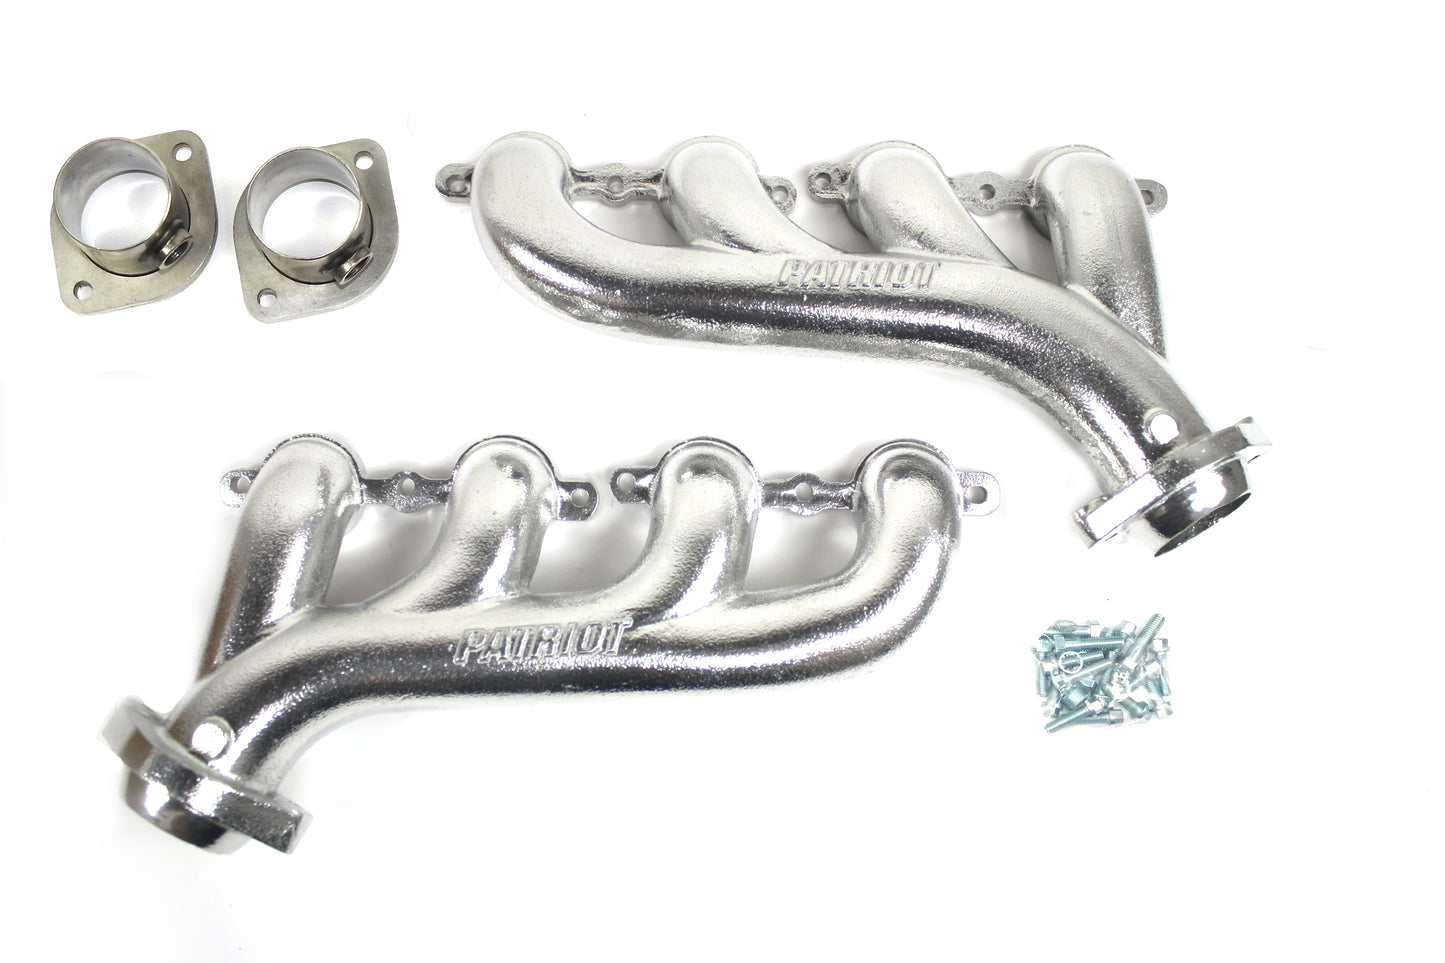 Patriot Headers H8097-1 1 5/8" Cast Tubular Manifolds for GM LS Engines (except LS7 and LS9) for Engine Swap applications and validated fitment on 70-81 GM F-Bodies, 82-88 GM G-Bodies and 68-72 GM A-Bodies Metallic Silver Ceramic finish